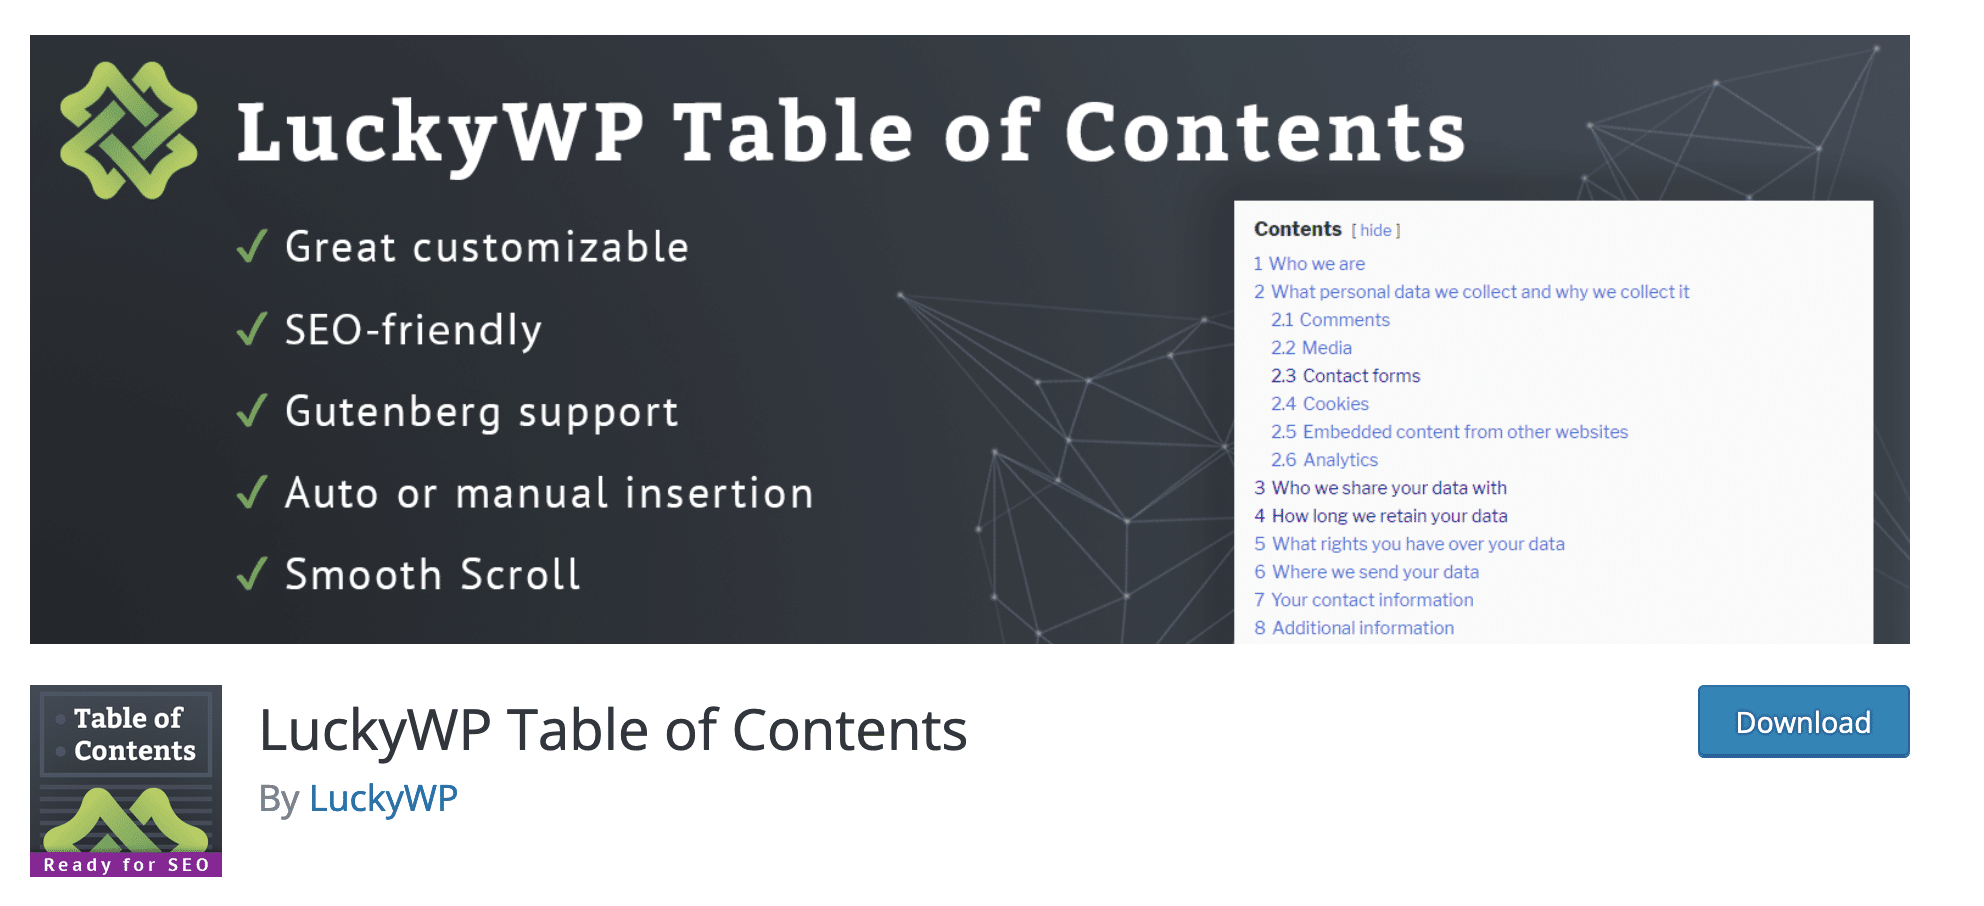 LuckyWP Table of Contents helps to create a table of contents on WordPress. 